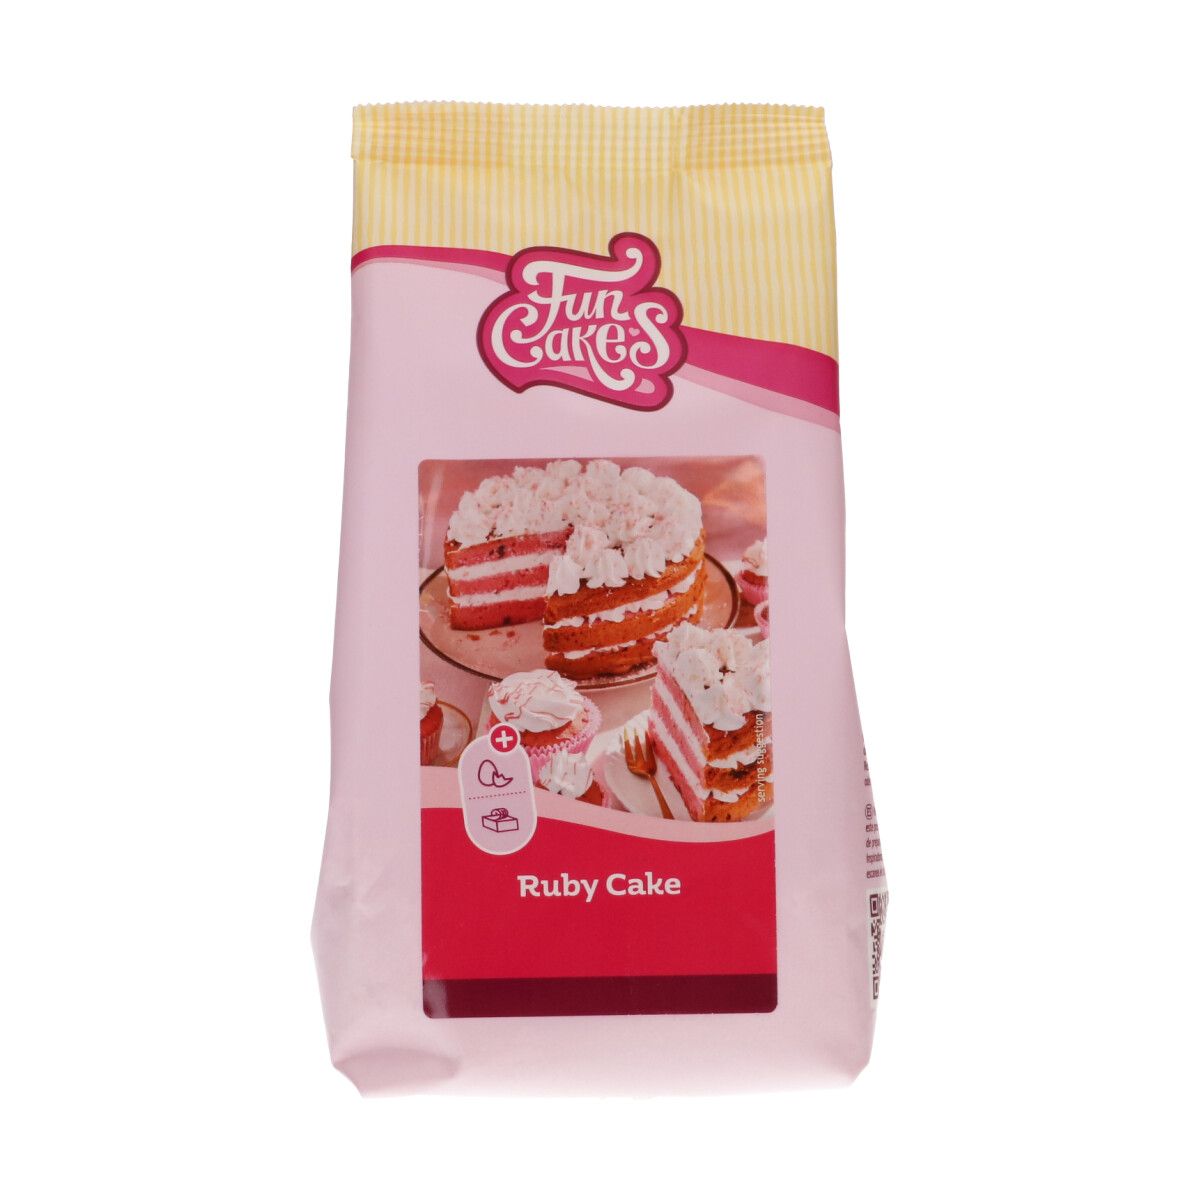 FUNCAKES MIX FOR RUBY CAKE 400G